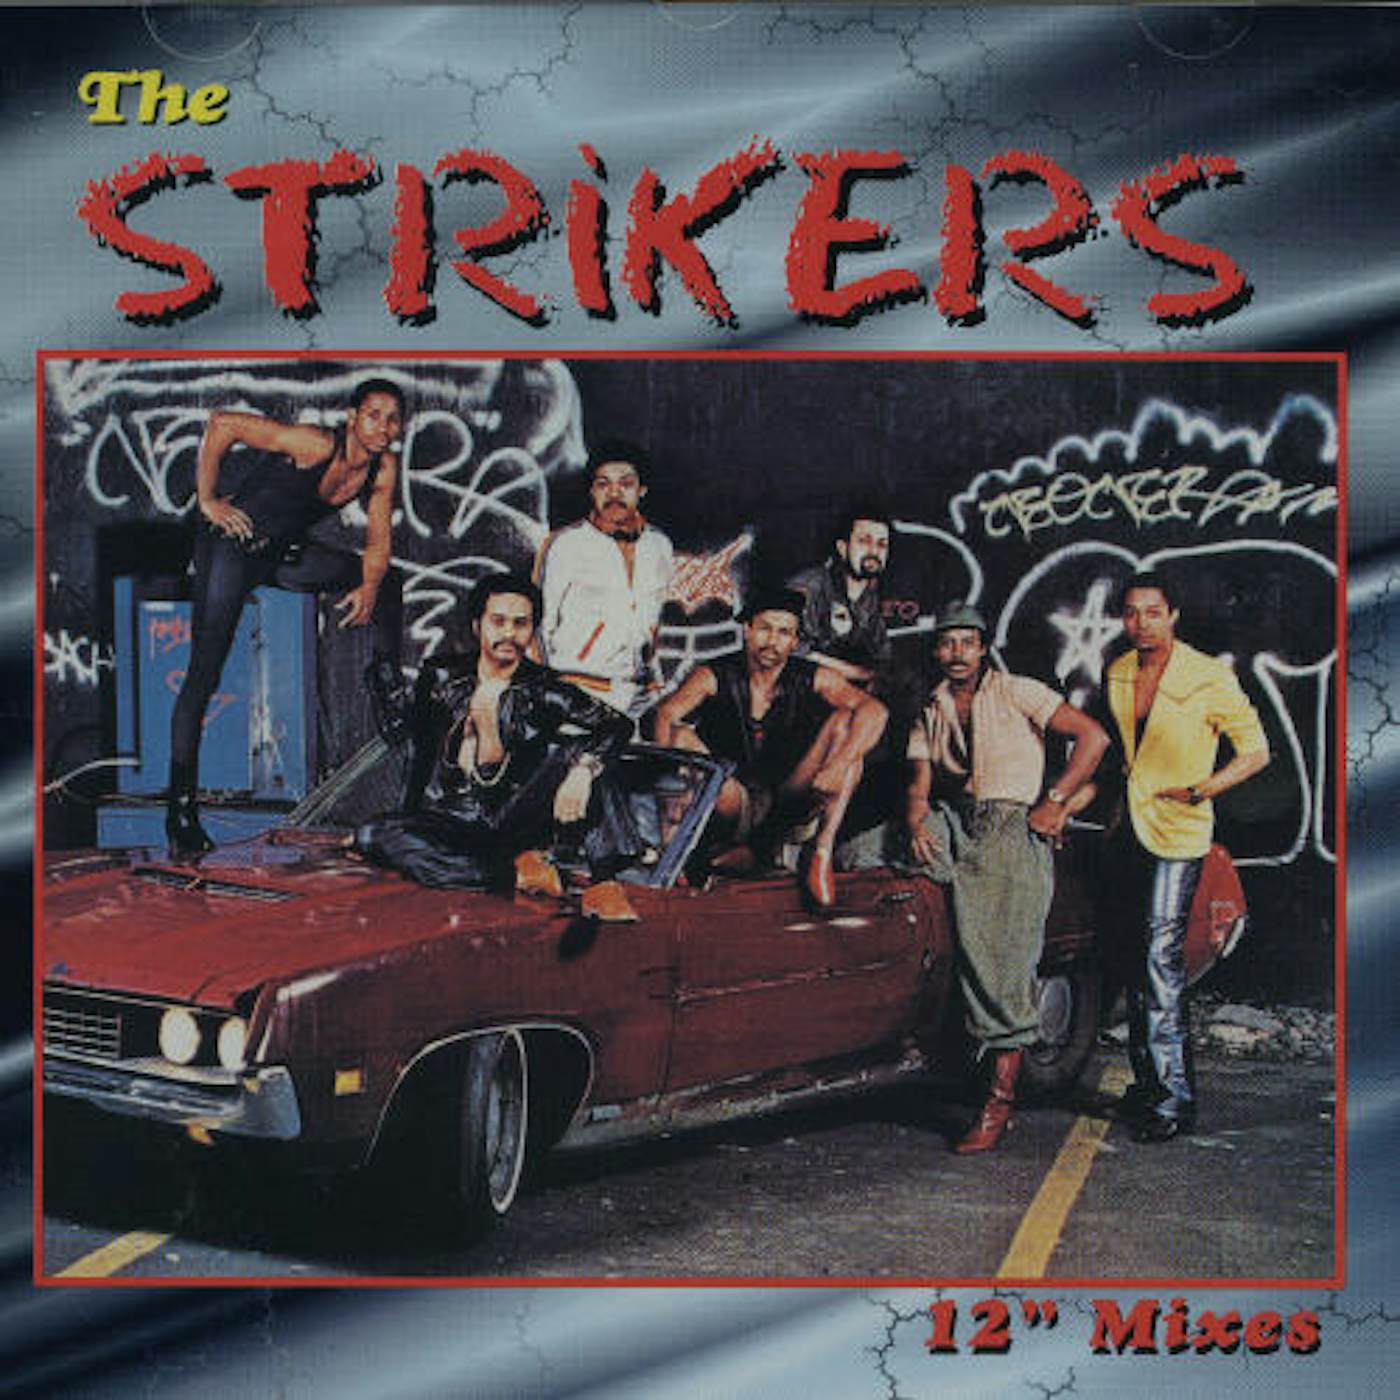 Strikers GREATEST HITS CD